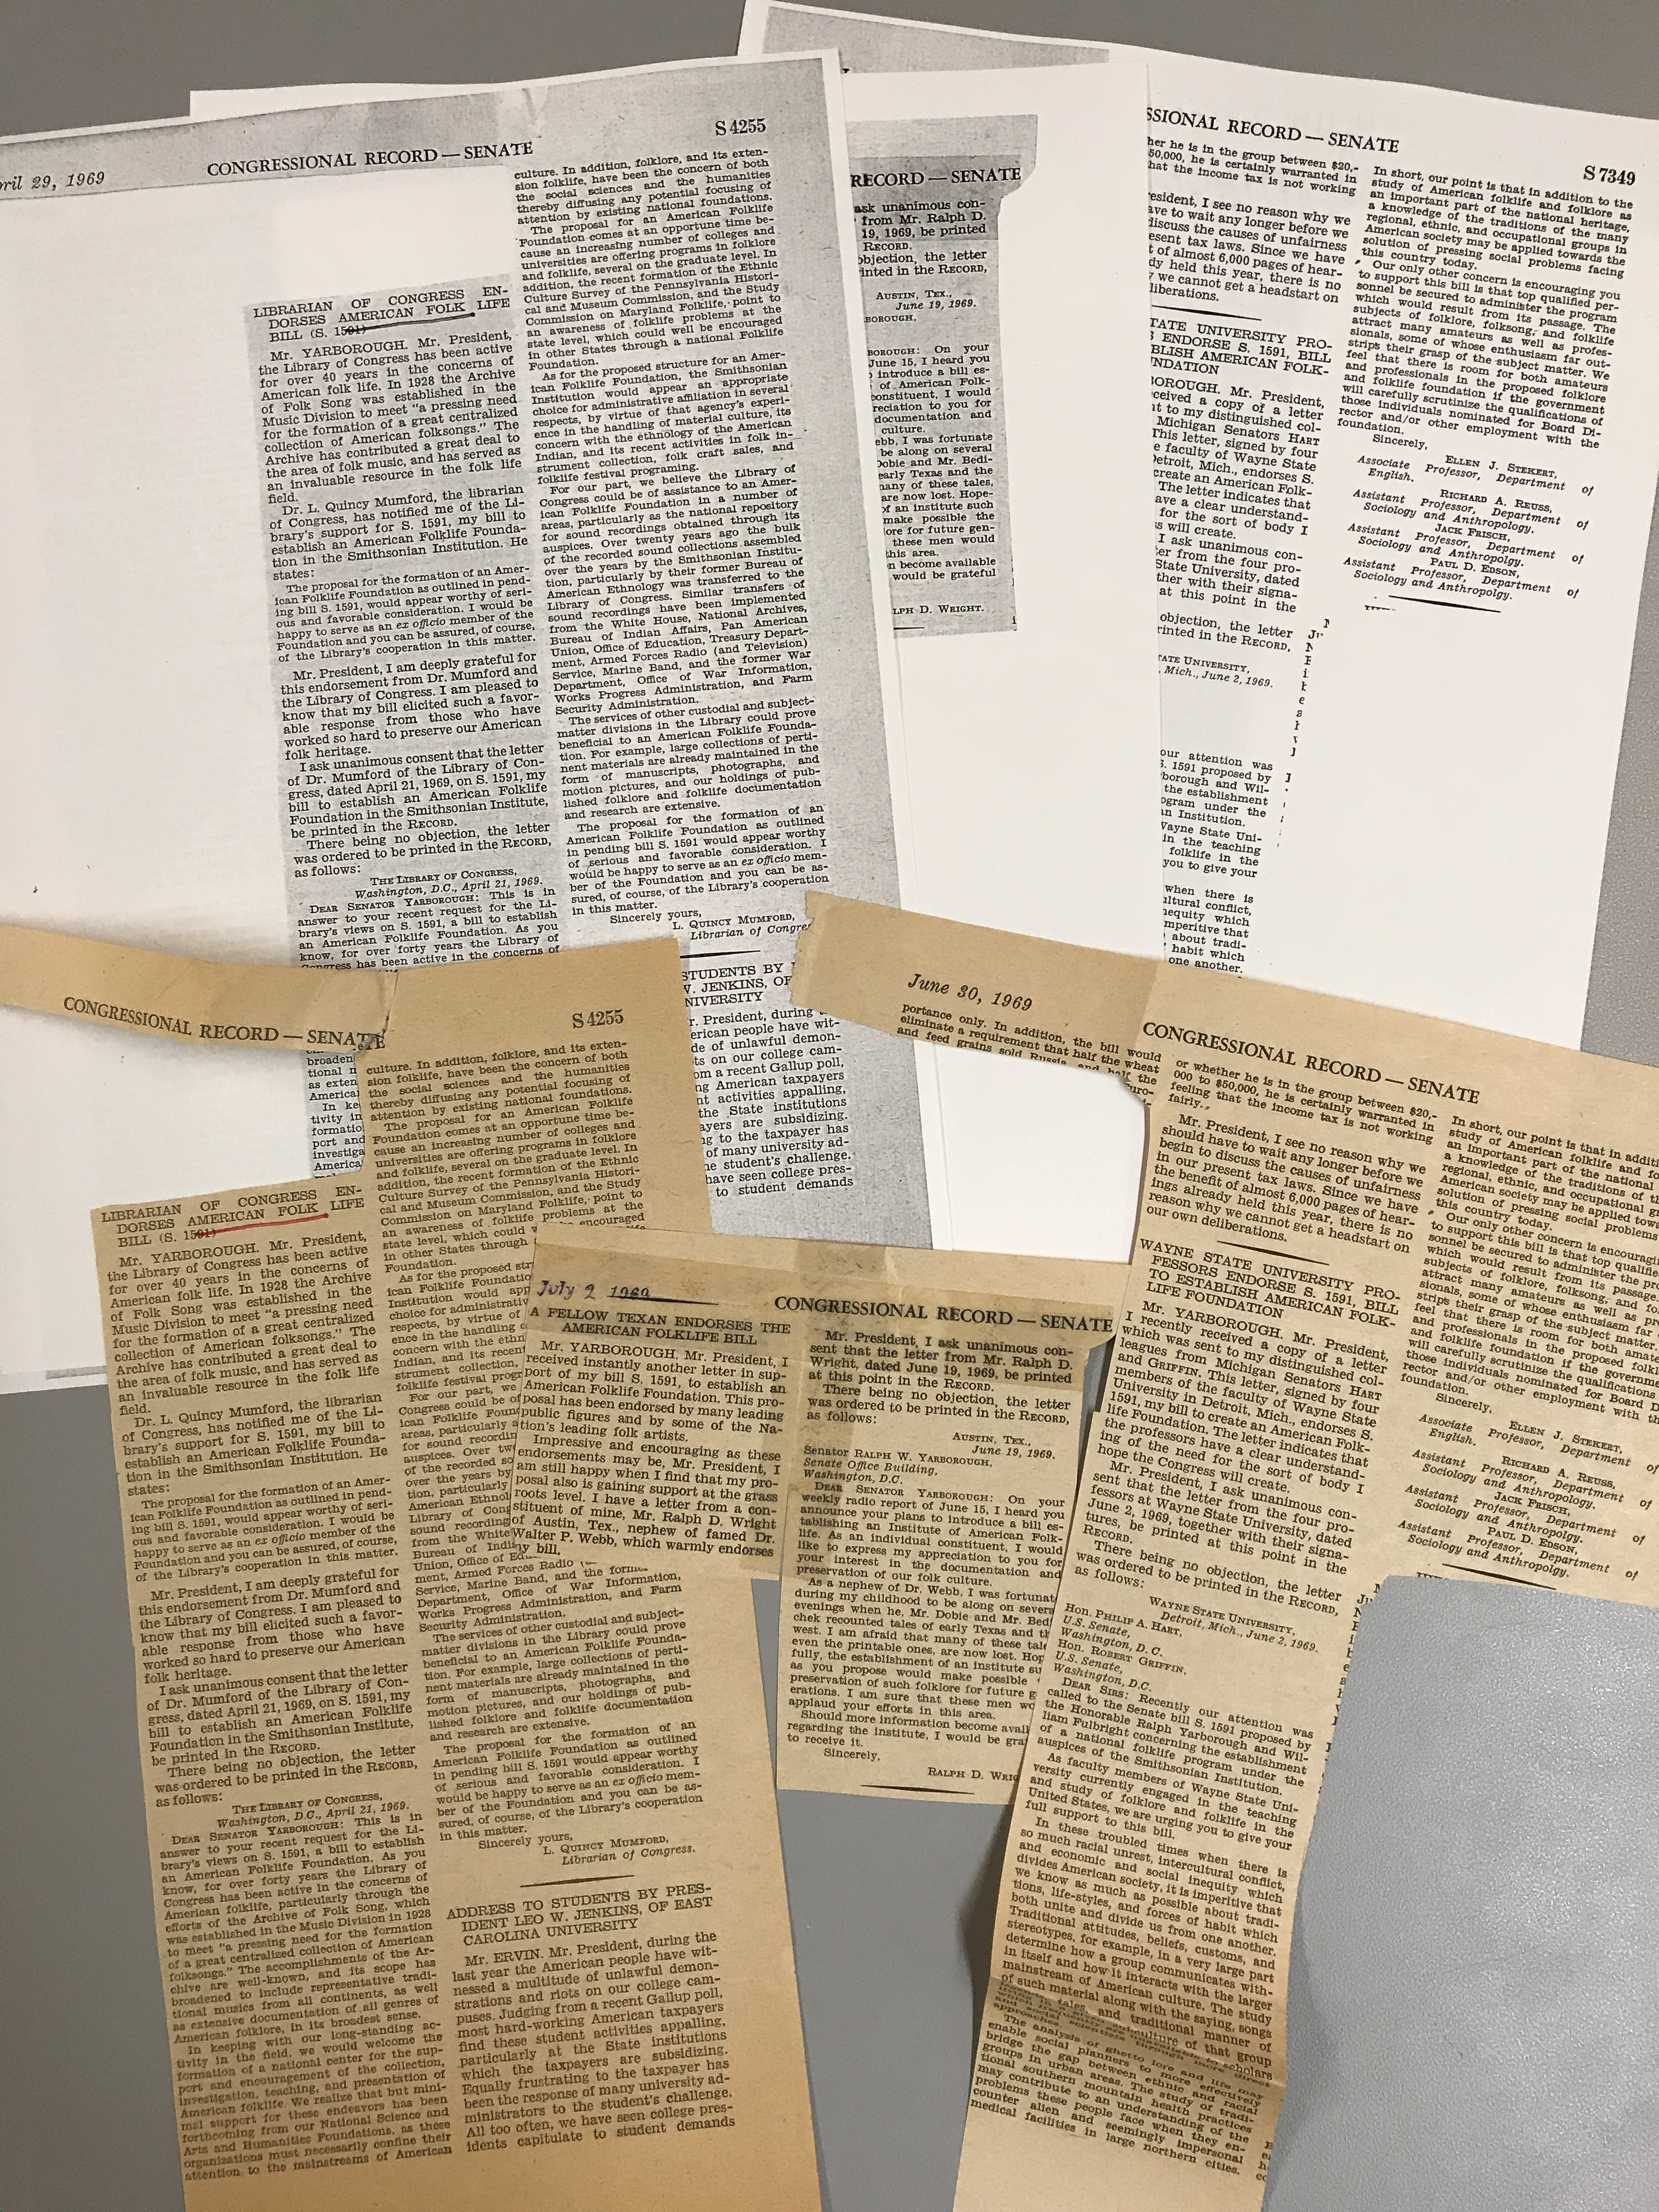 Original news clippings in front of preservation photo copies